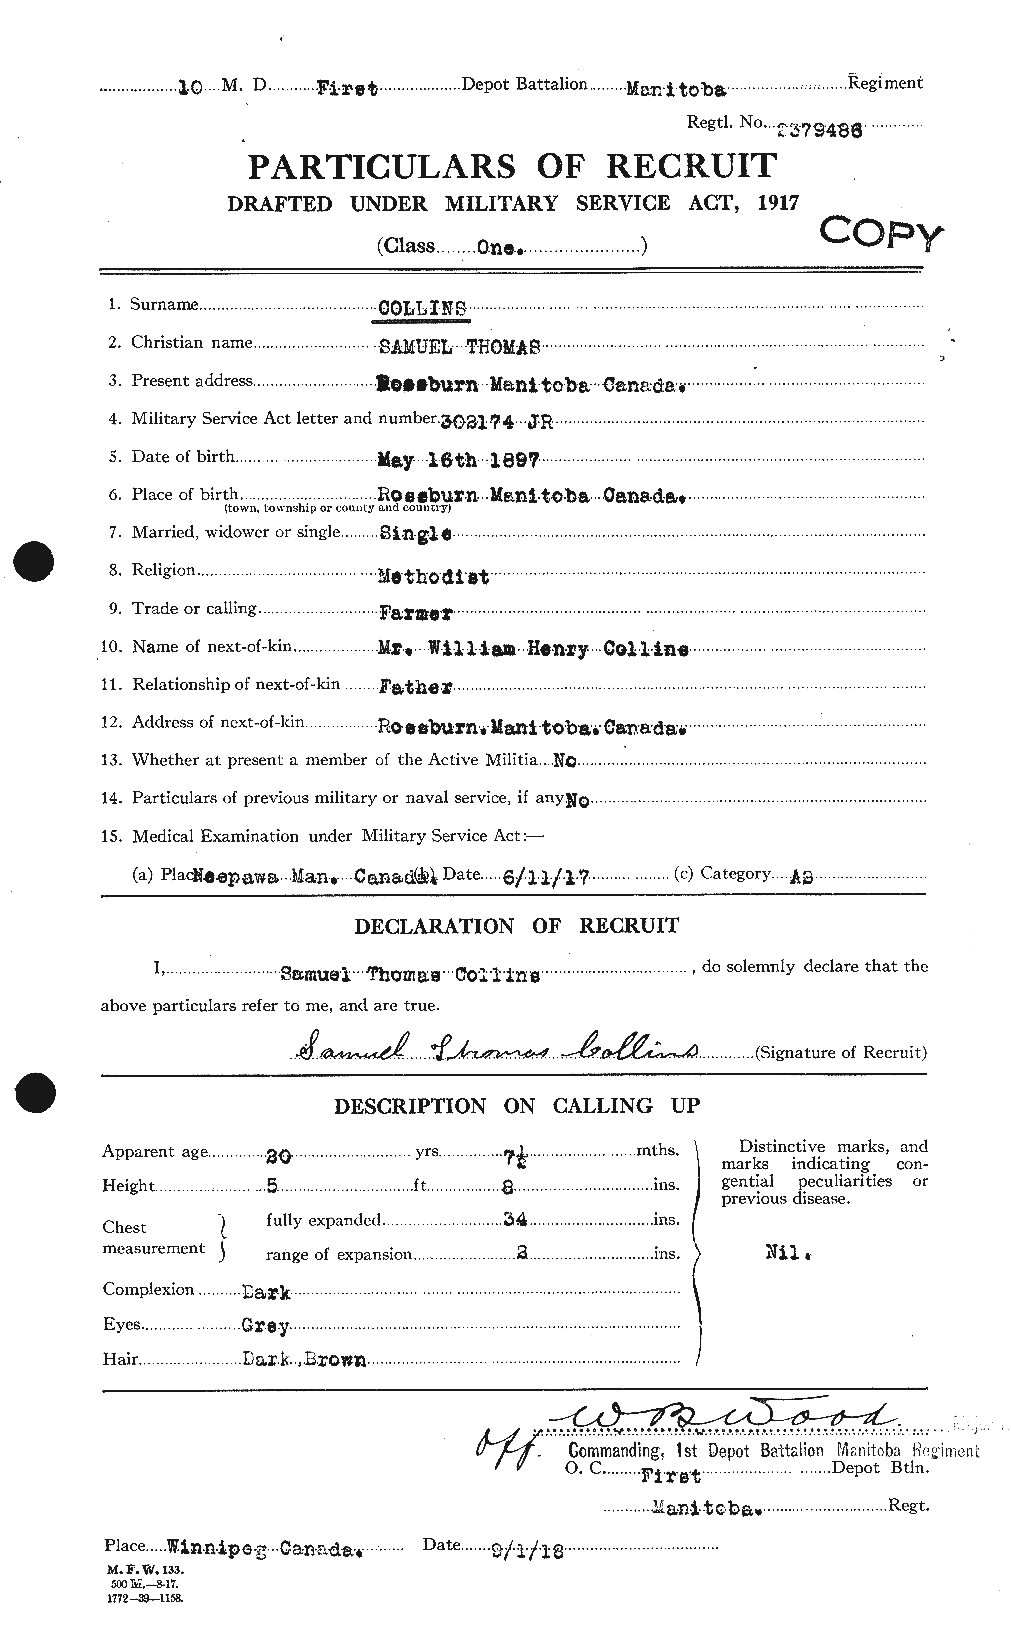 Personnel Records of the First World War - CEF 069158a